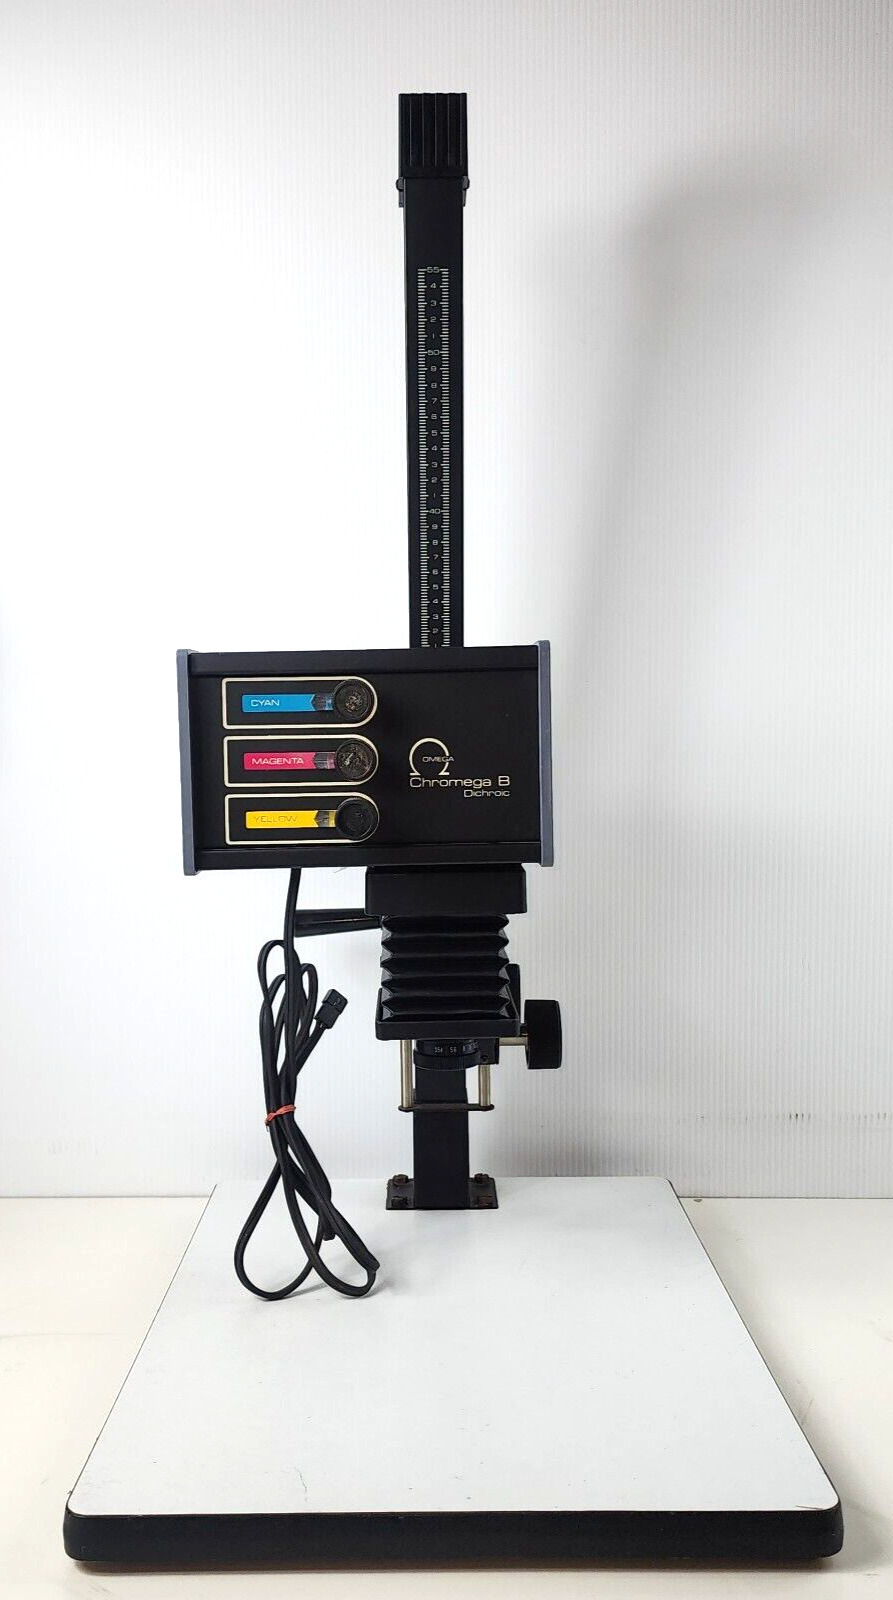 Omega Chromega B Dichroic B600 Enlarger W/ Stand (power Supply Not Included)